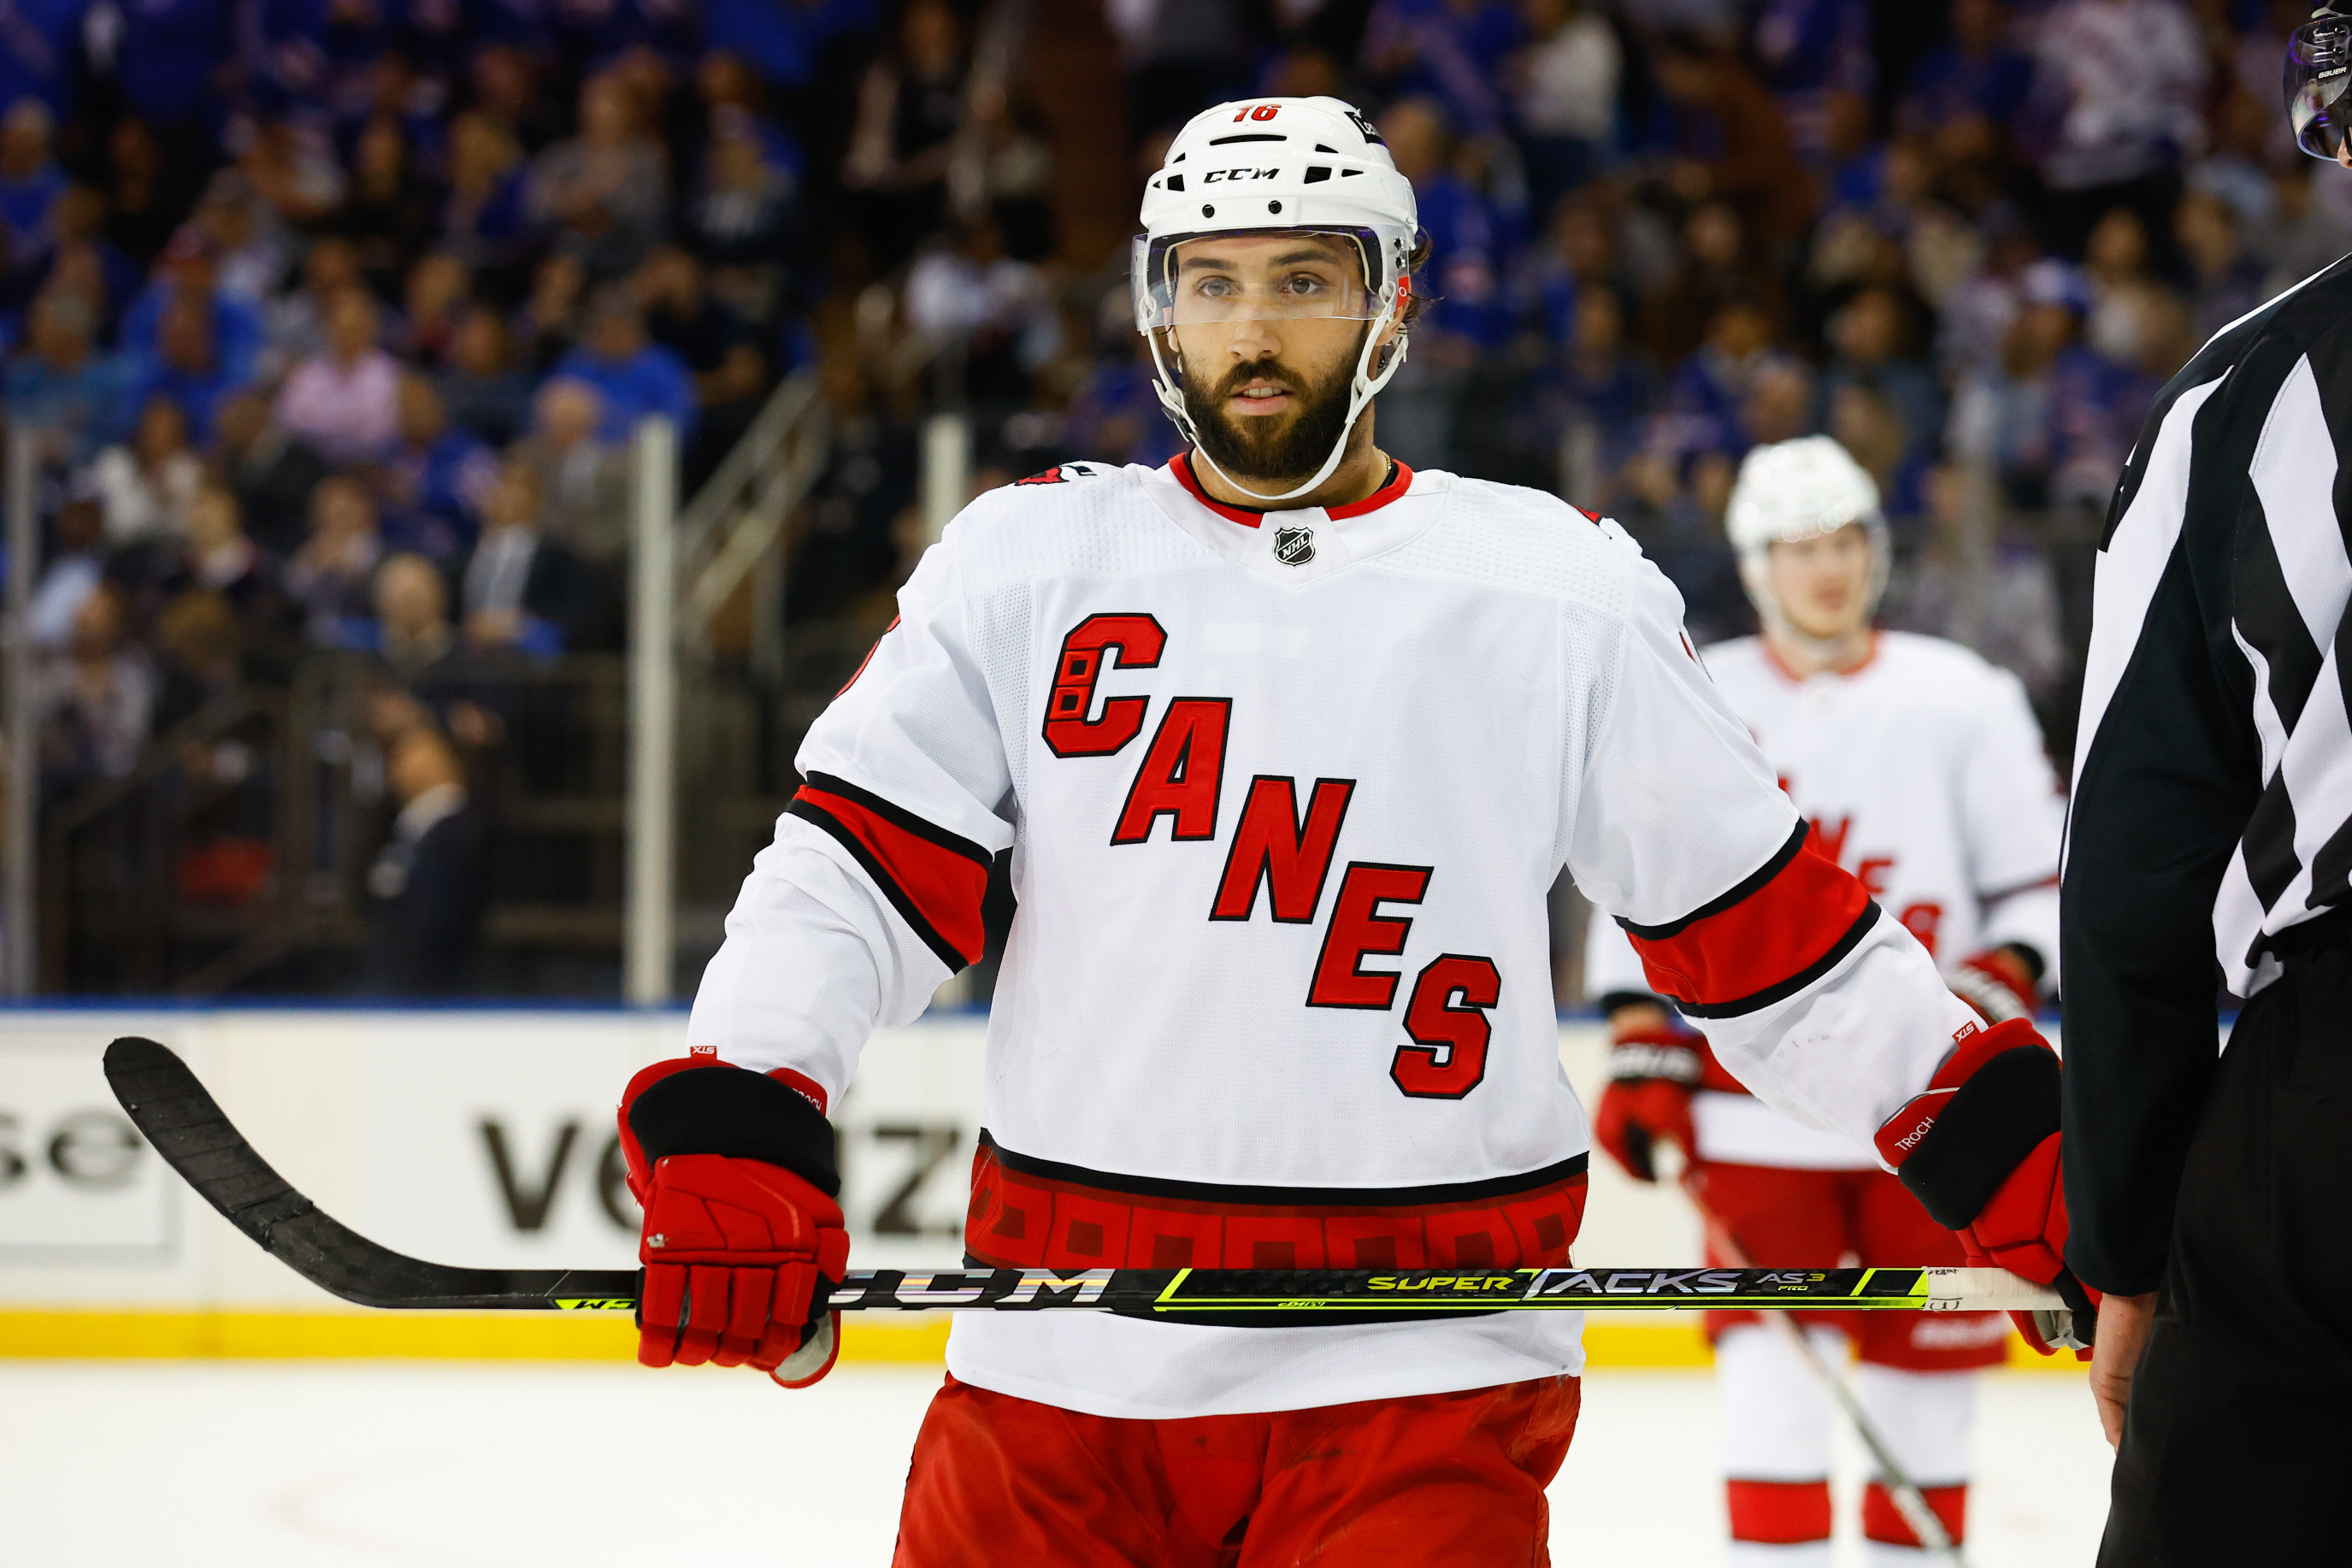 Contracts for top NHL restricted free agents rising - Sports